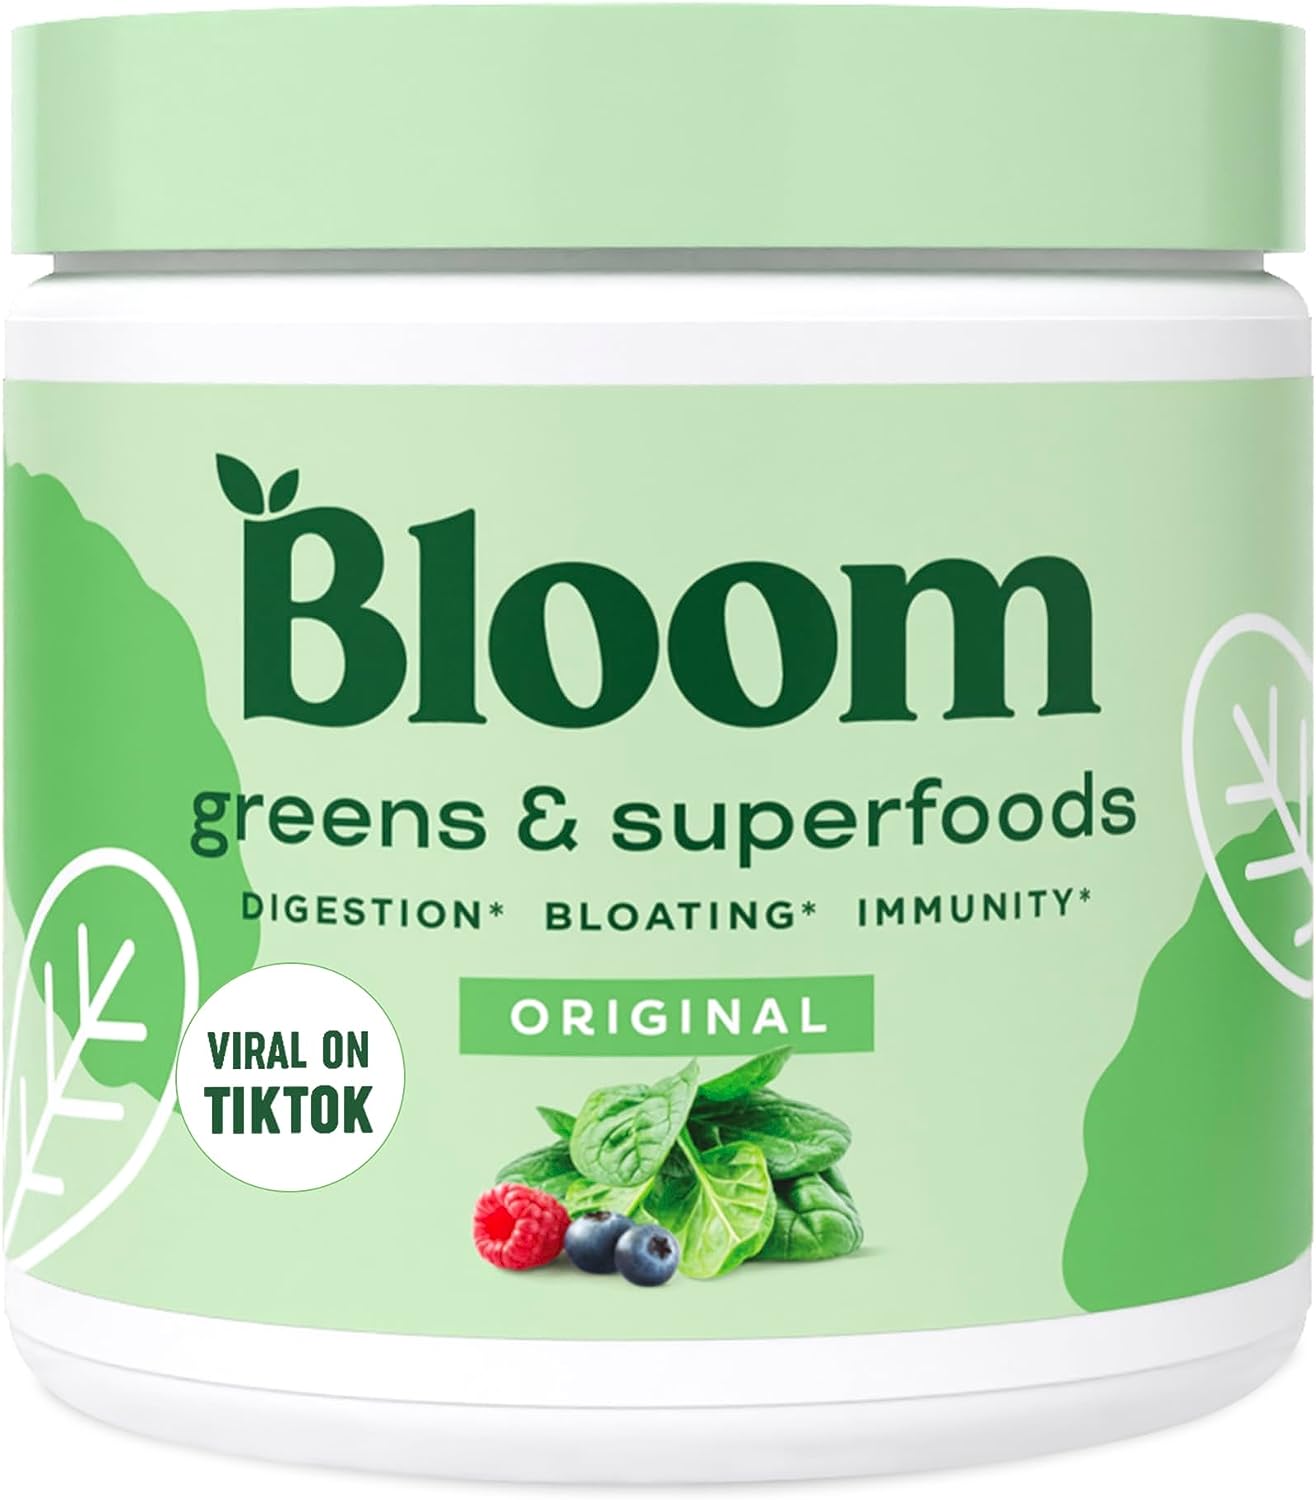 Bloom Nutrition Reviews